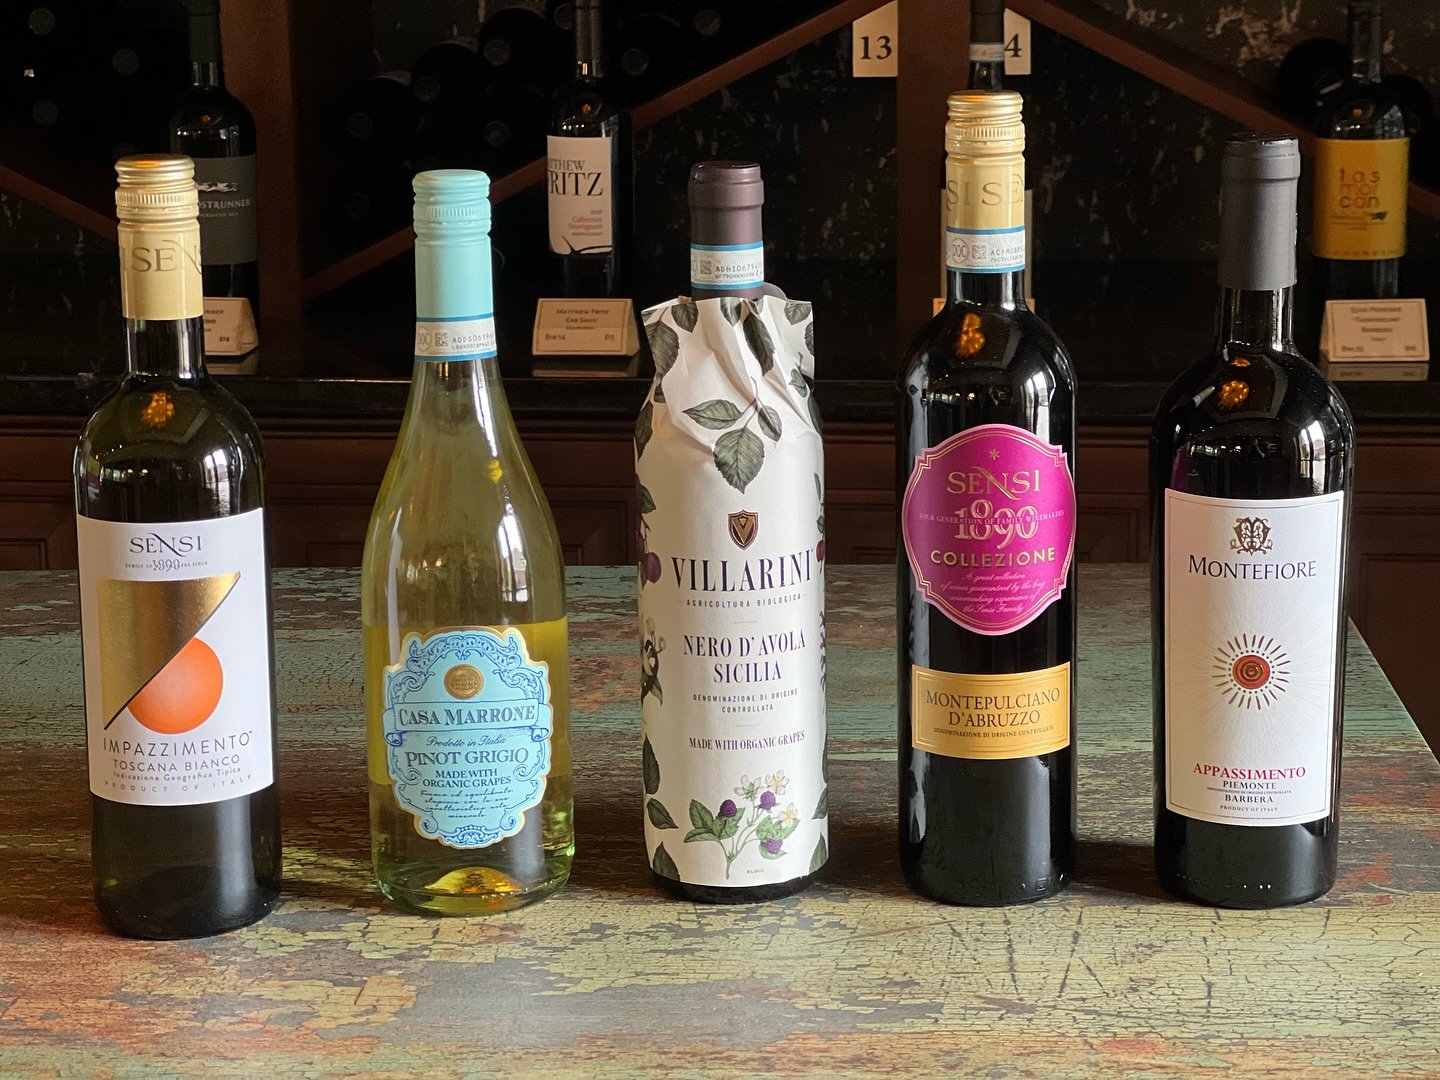 Sip, swirl &amp; savor these 5 new wines for just $15 TONIGHT, May 1st at BLUE ASH! Join us on the first Wednesday of every month at 6 PM at our Blue Ash and Lebanon locations for great deals on new wines! There&rsquo;s no registration needed and lar